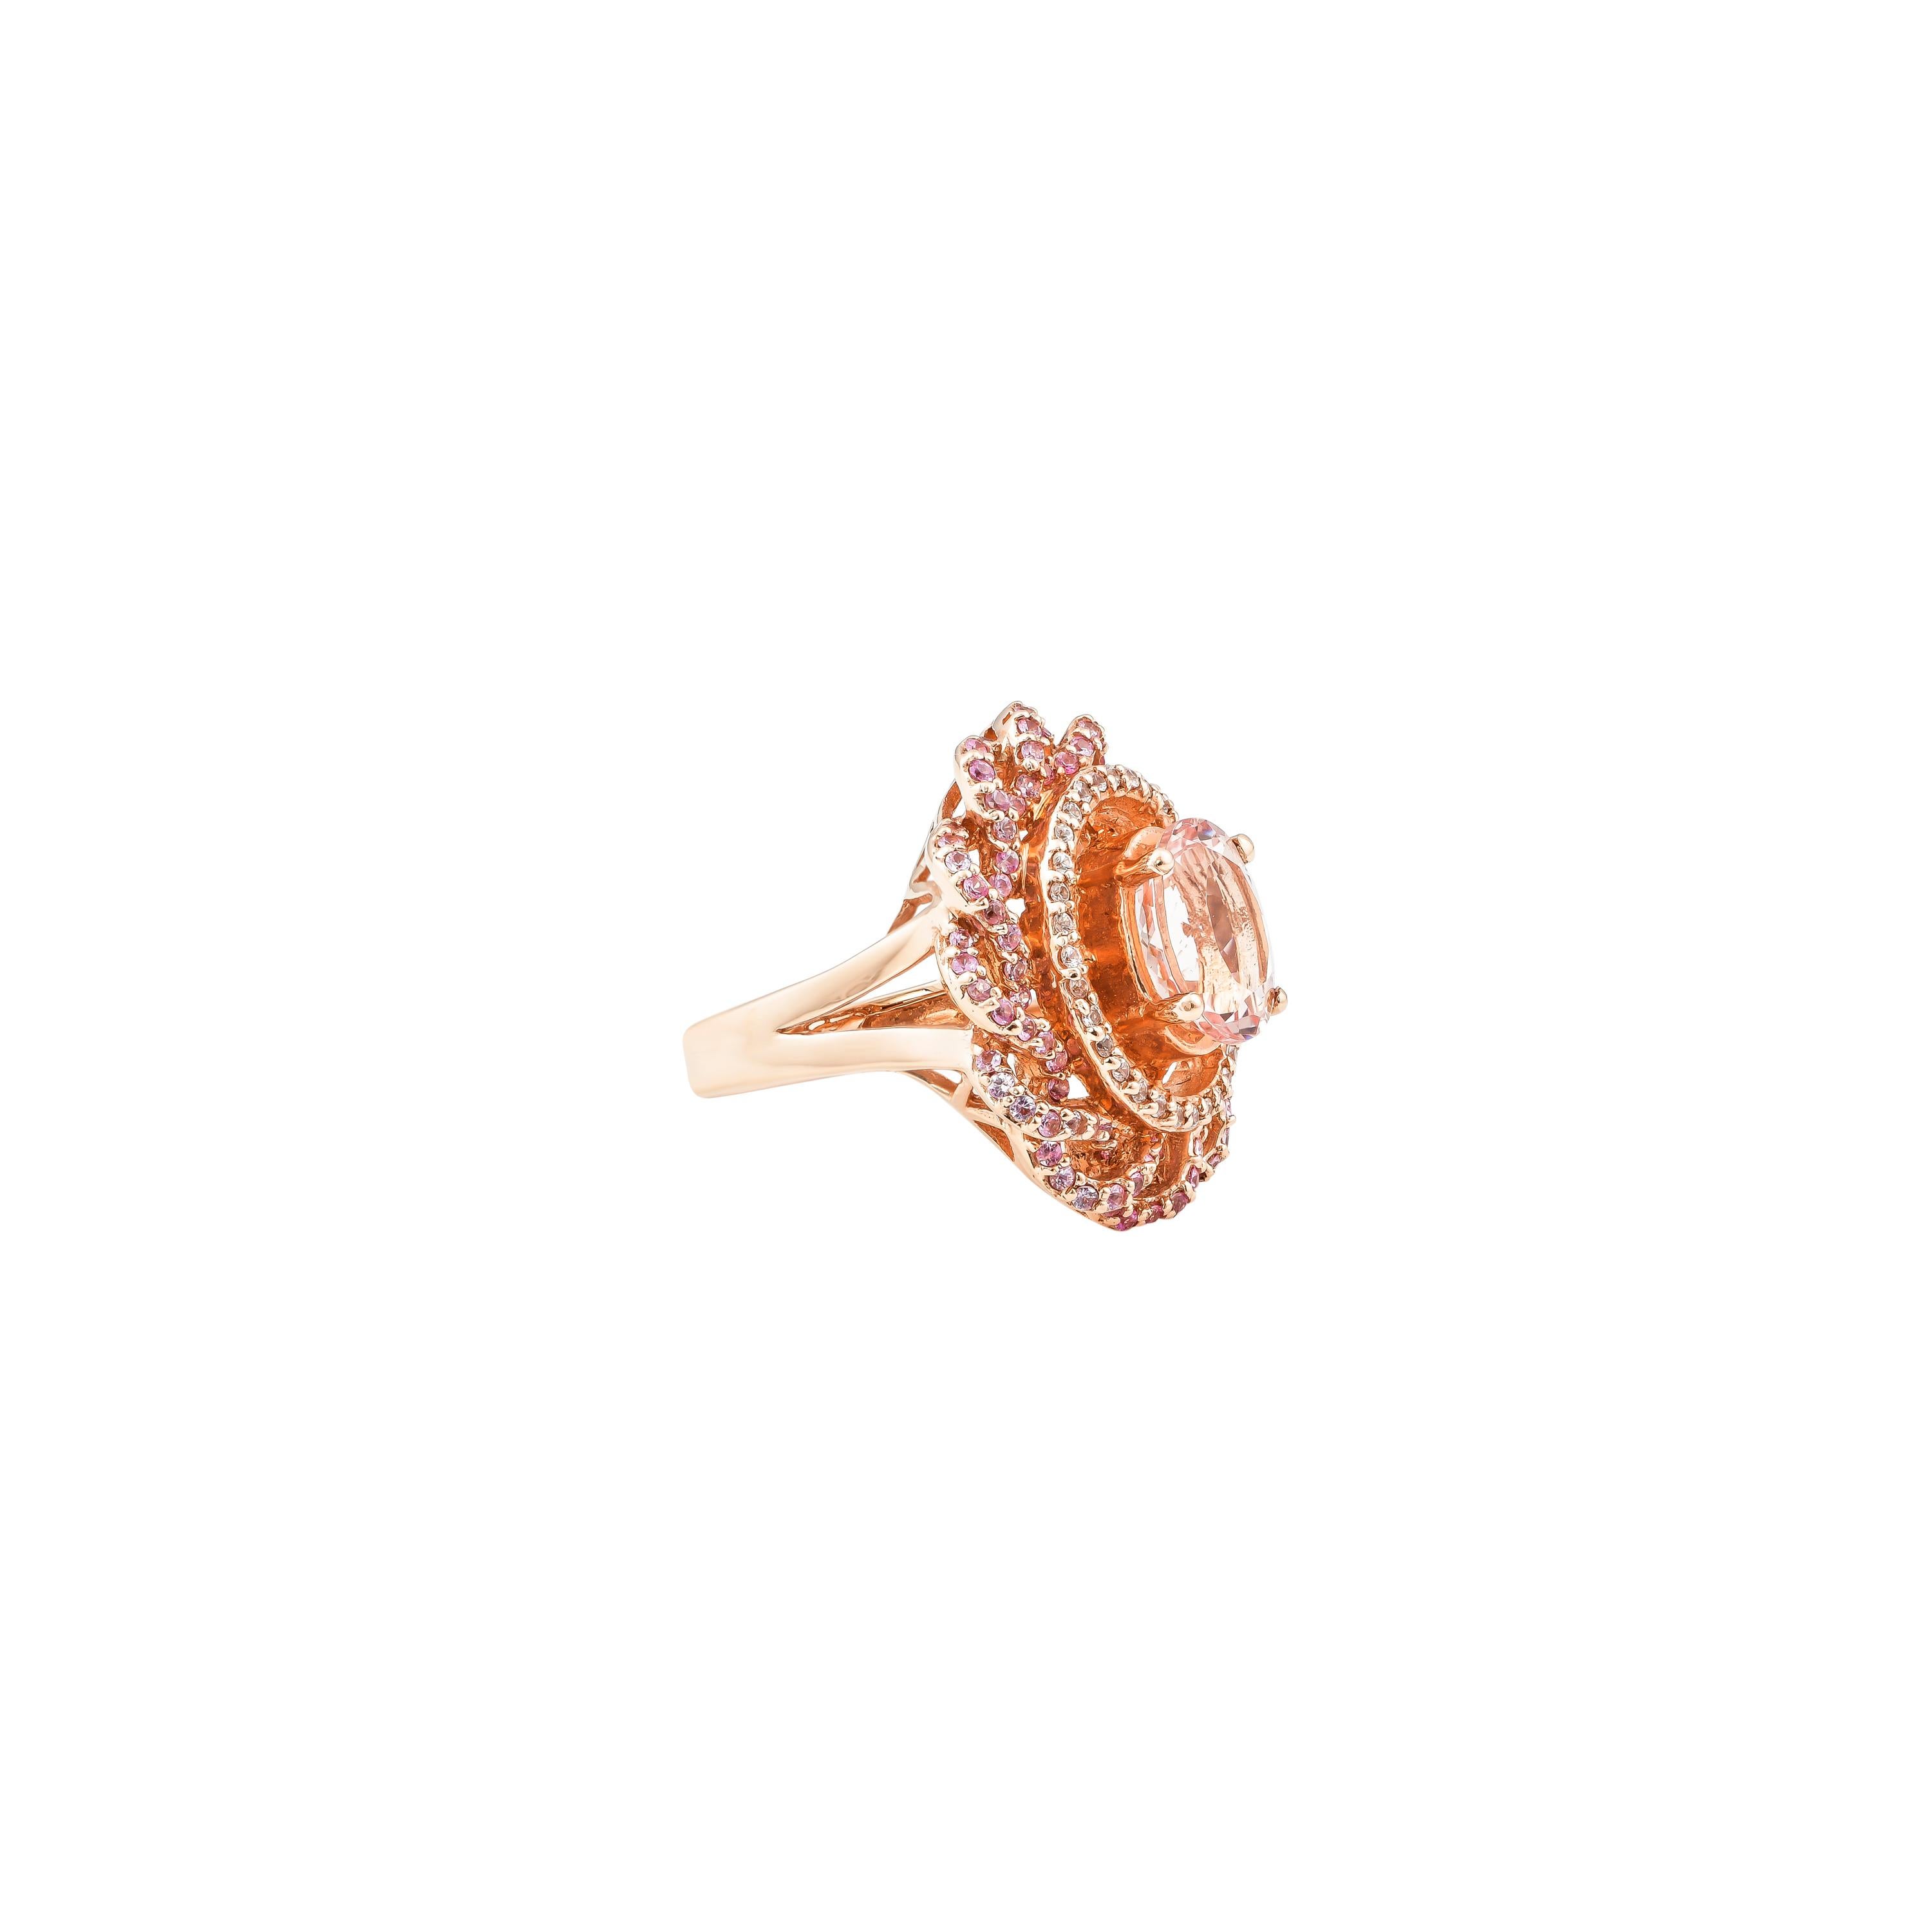 This collection features an array of magnificent morganites! Accented with diamonds these rings are made in rose gold and present a classic yet elegant look. 

Classic morganite ring in 18K rose gold with diamonds. 

Morganite: 3.12 carat oval